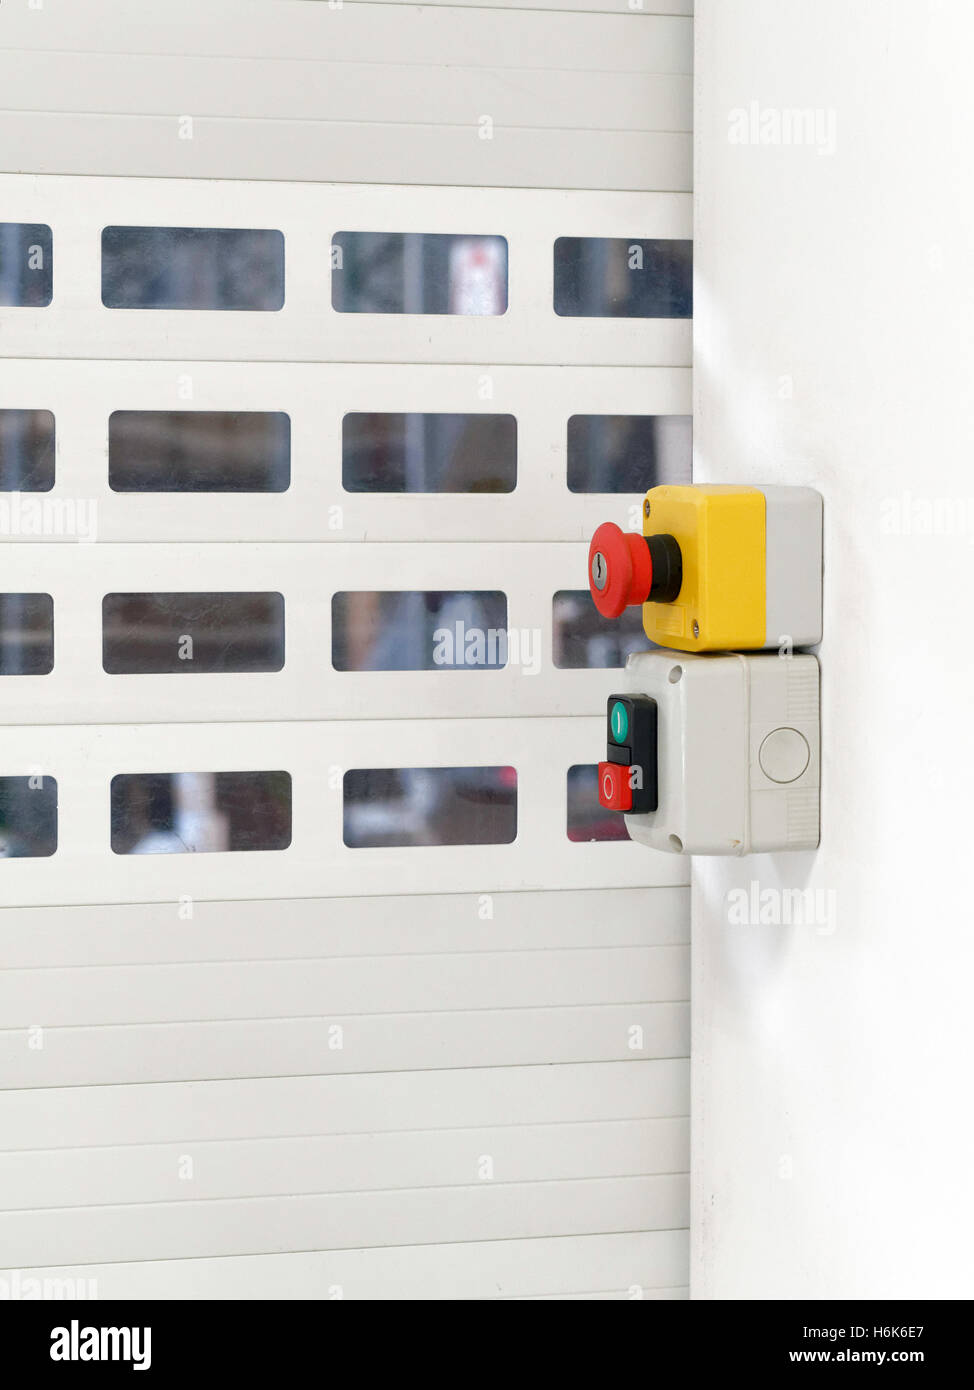 Accordion door, switch and emergency stop button are visible Stock Photo